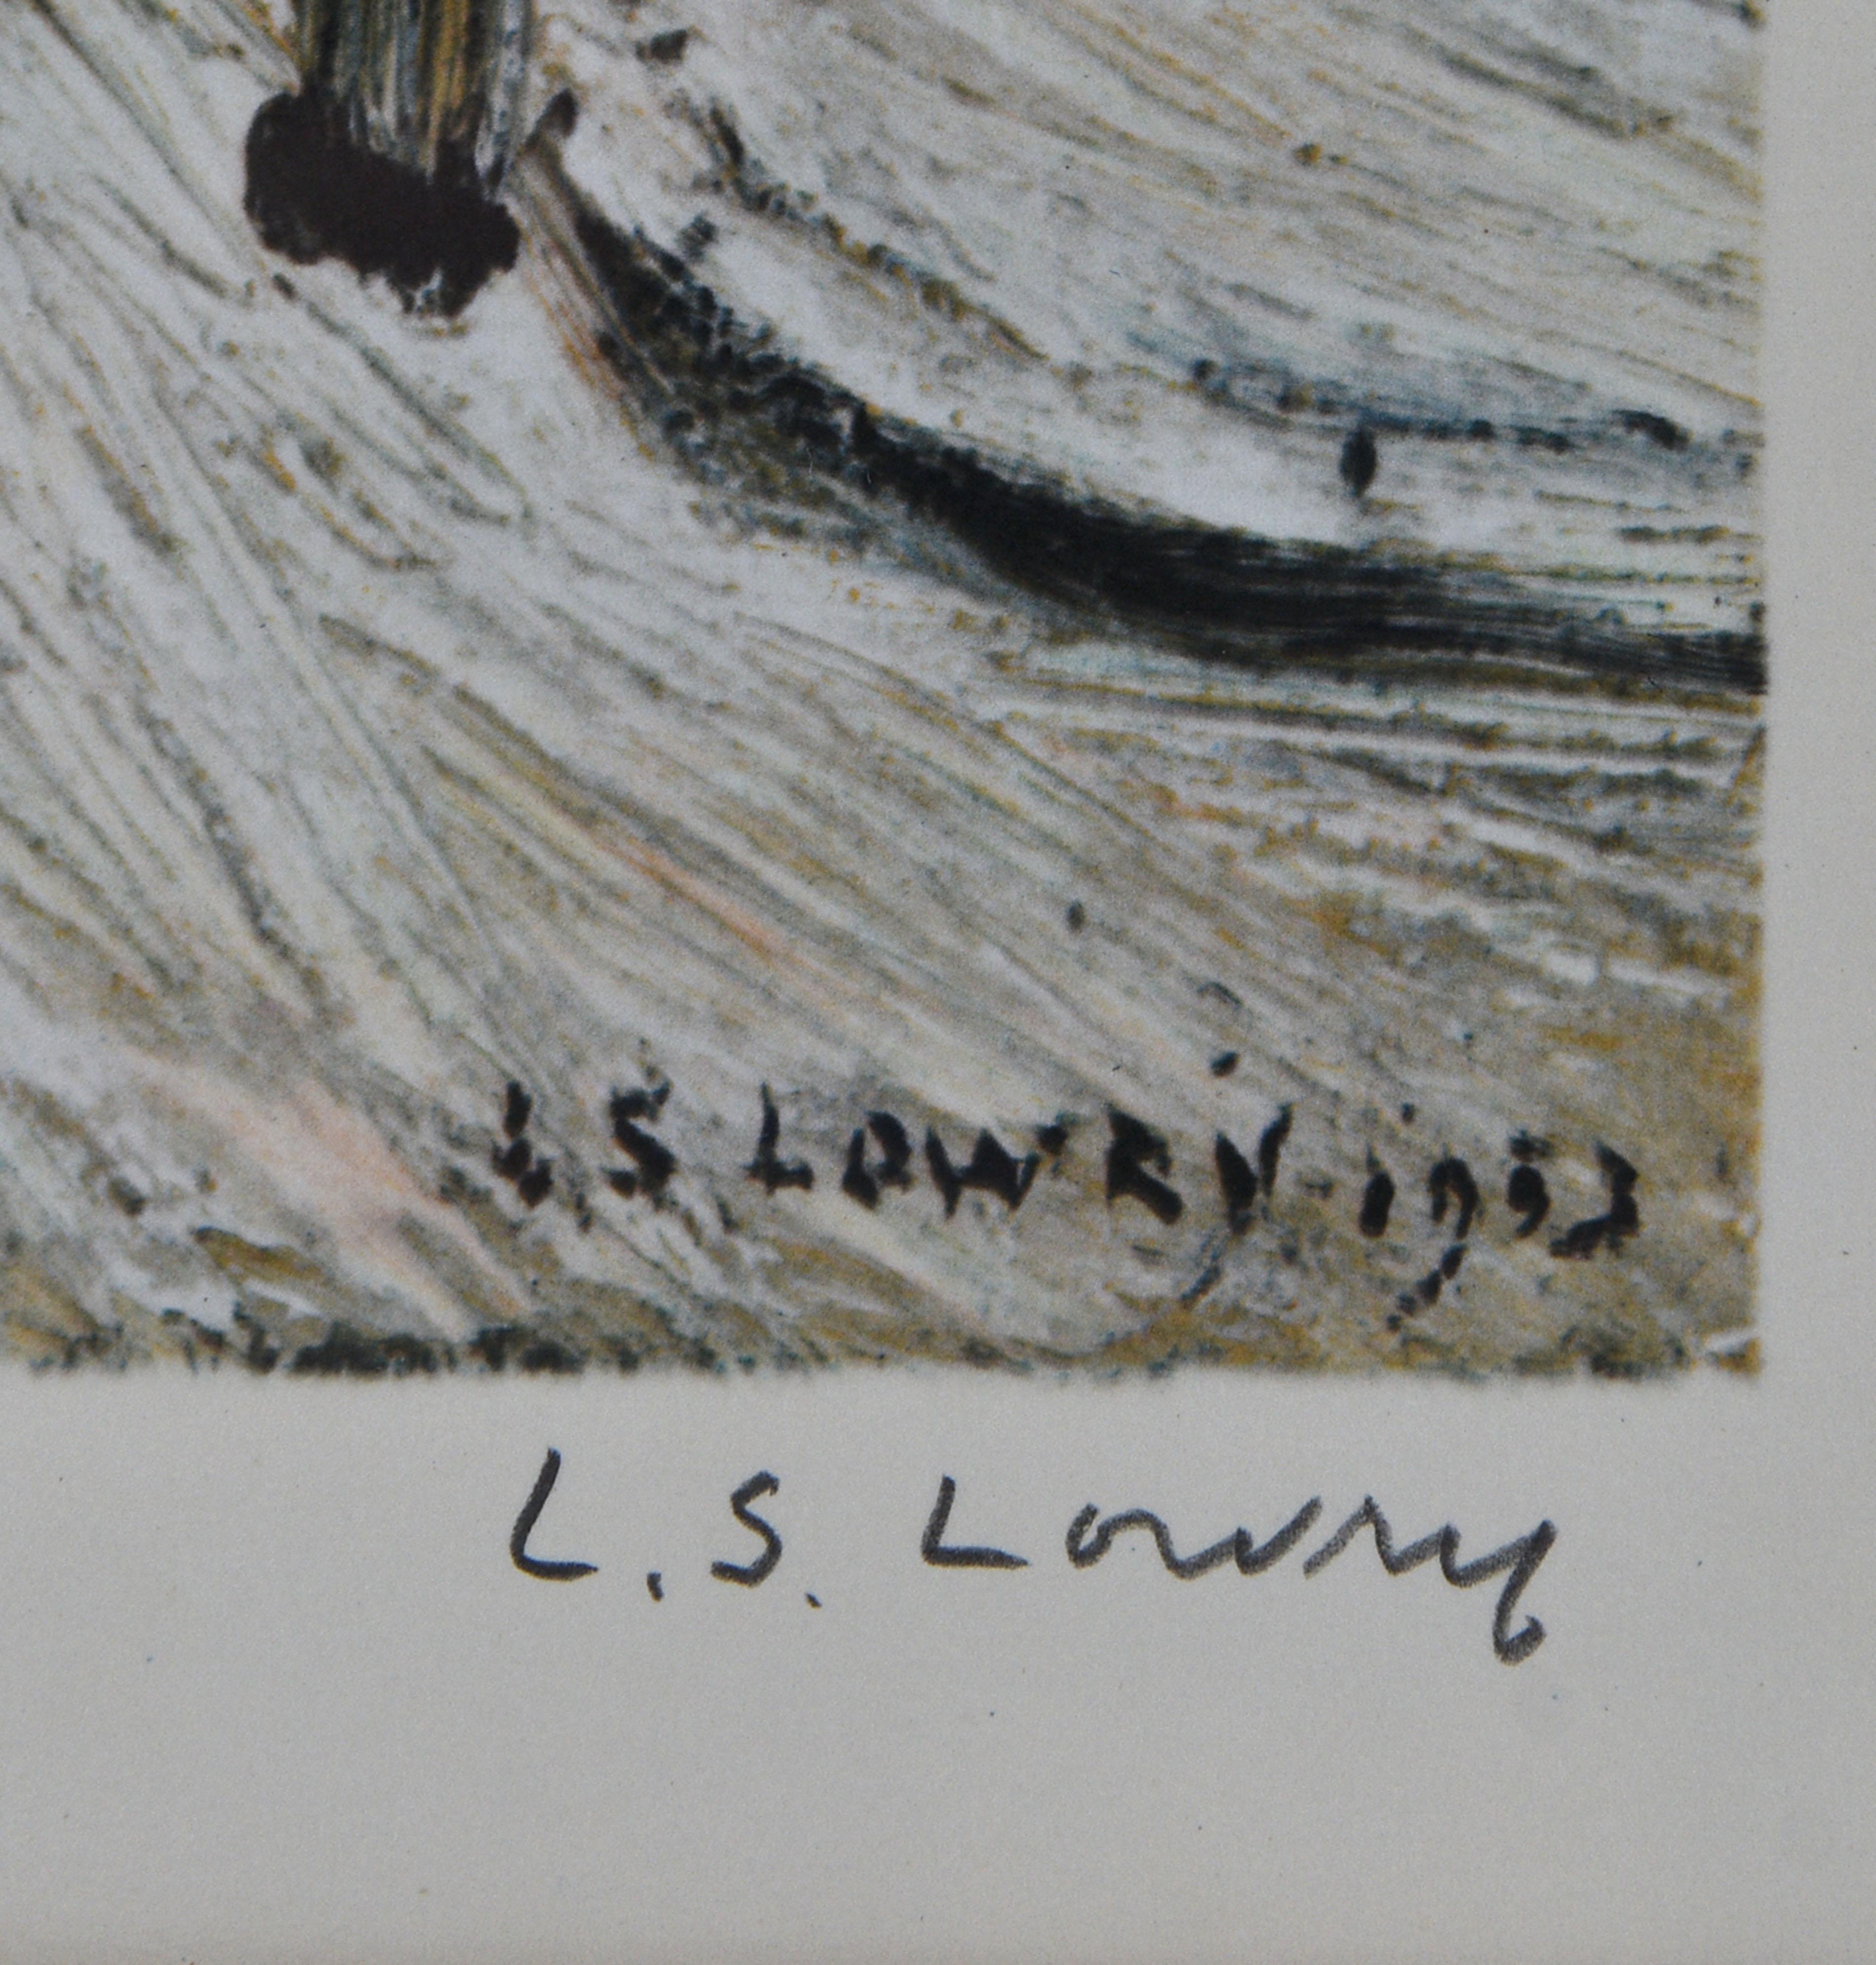 lowry signed limited edition prints